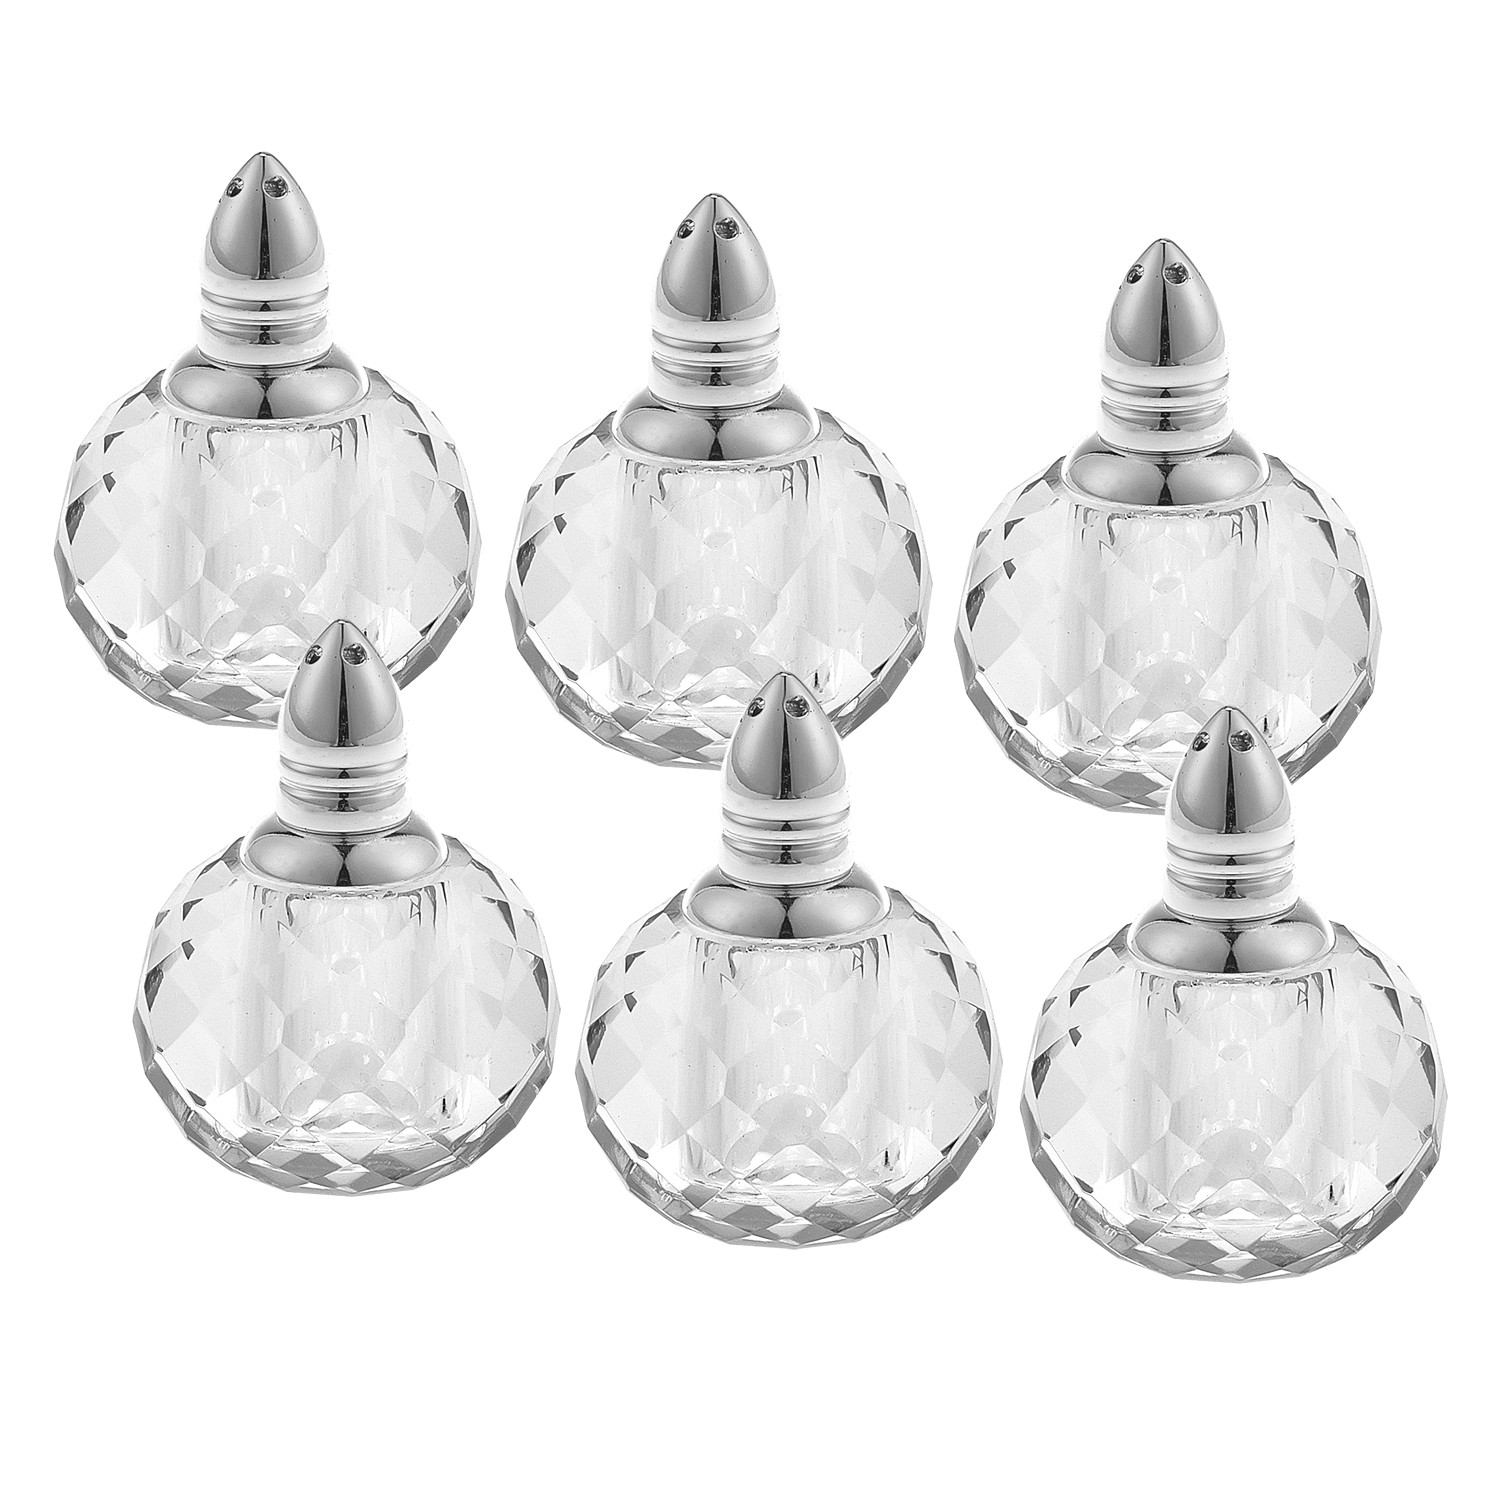 Individual Silver Crystal Zendra Design Salt & Peppers - Gift Boxed 6 Pc Set